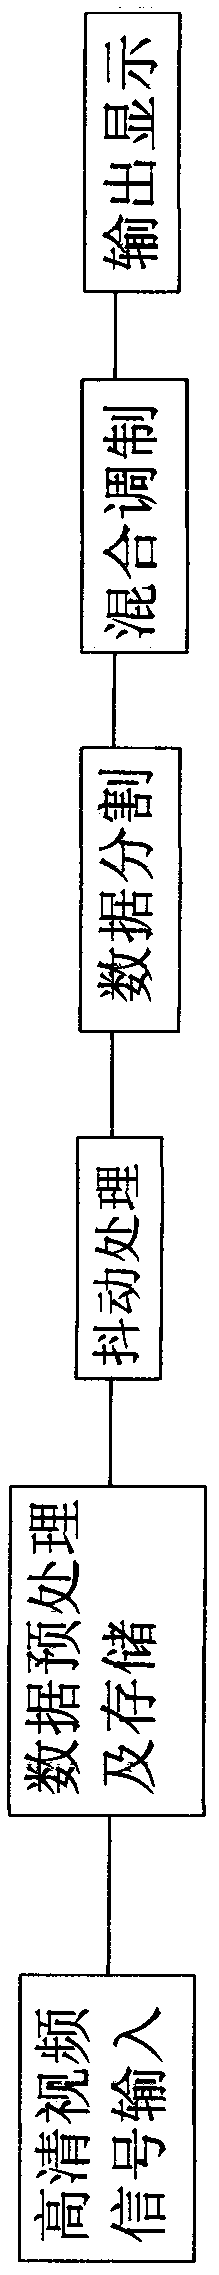 Mixed gray modulation high-gray-level and high-definition image displaying method and device